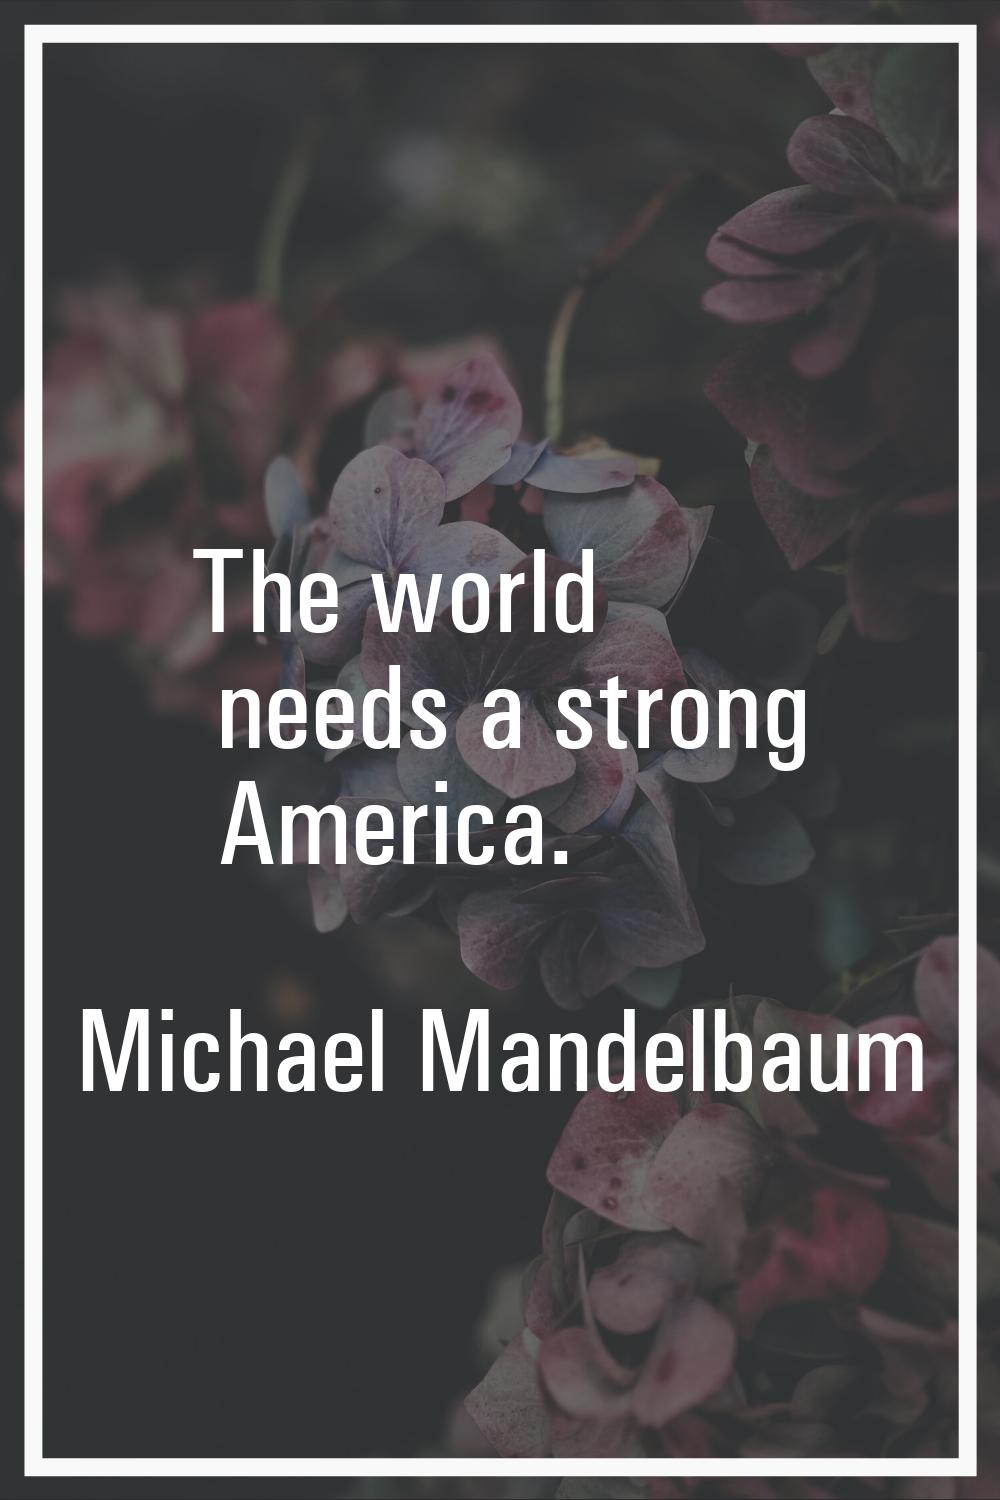 The world needs a strong America.